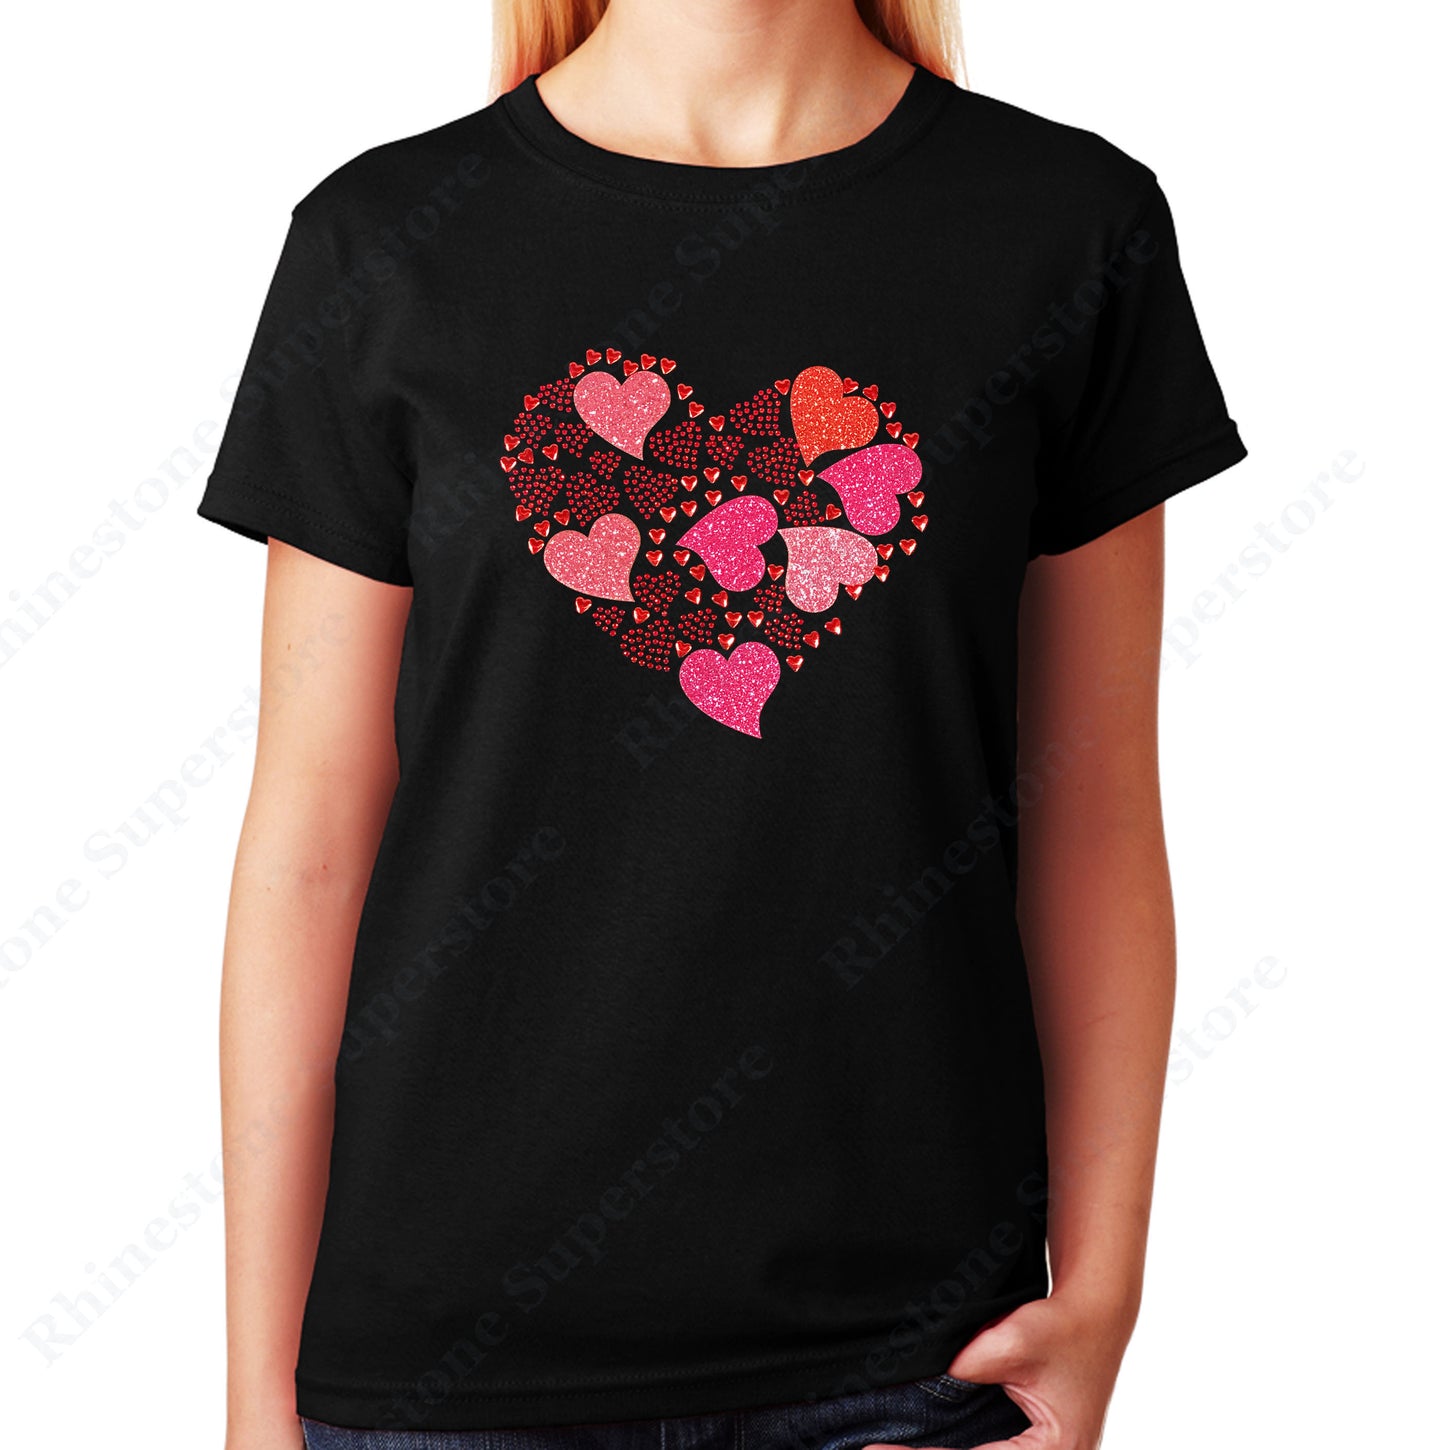 Women's / Unisex T-Shirt with Hearts Collage in Rhinestones and Glitters